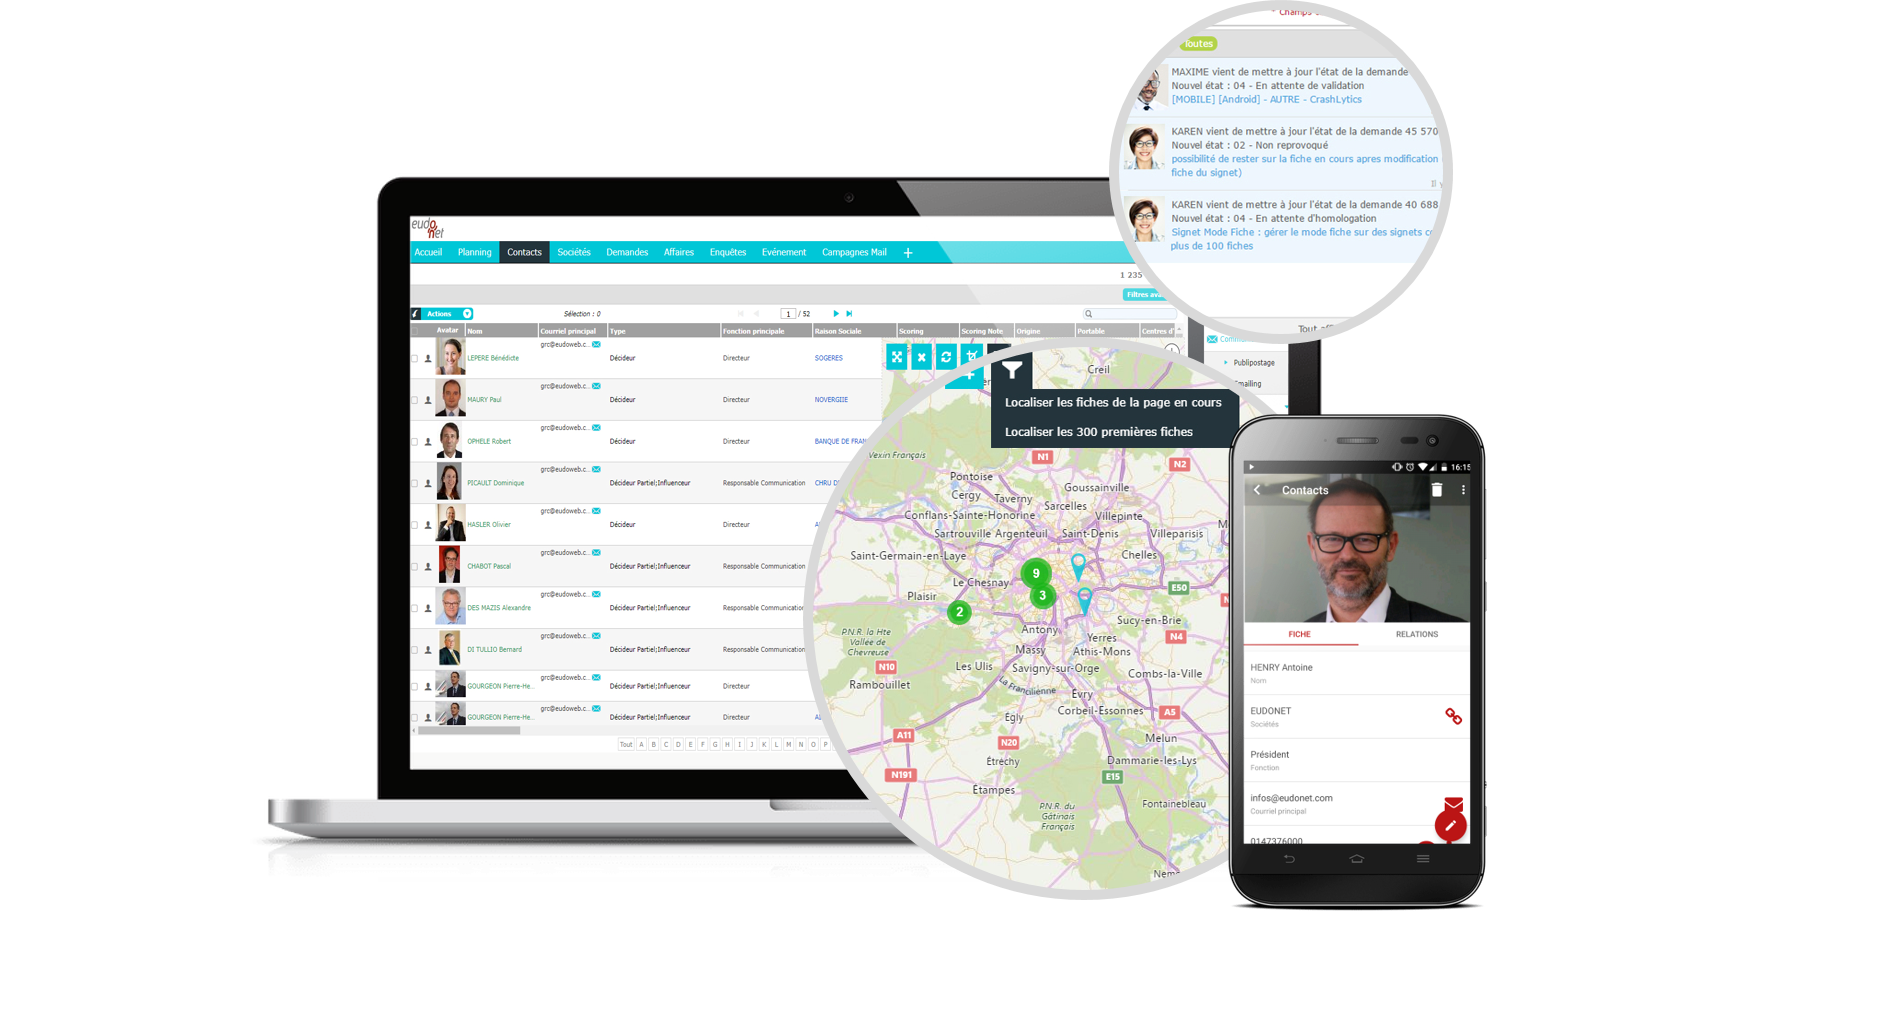 Eudonet CRM - Place your CRM at the heart of your information system by connecting it to all your applications